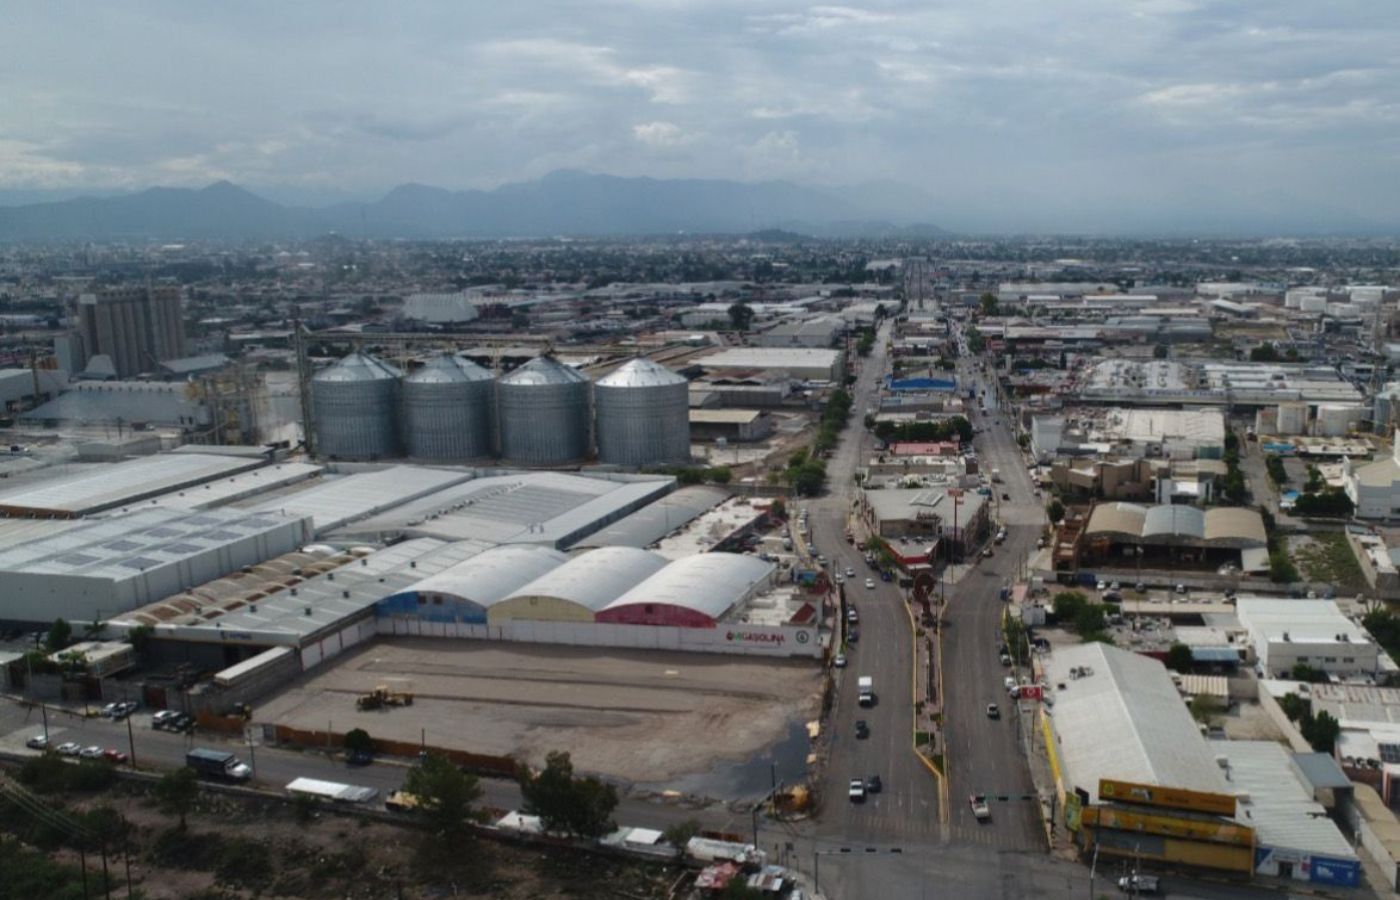 Nearshoring and Torreon's industrial consolidation